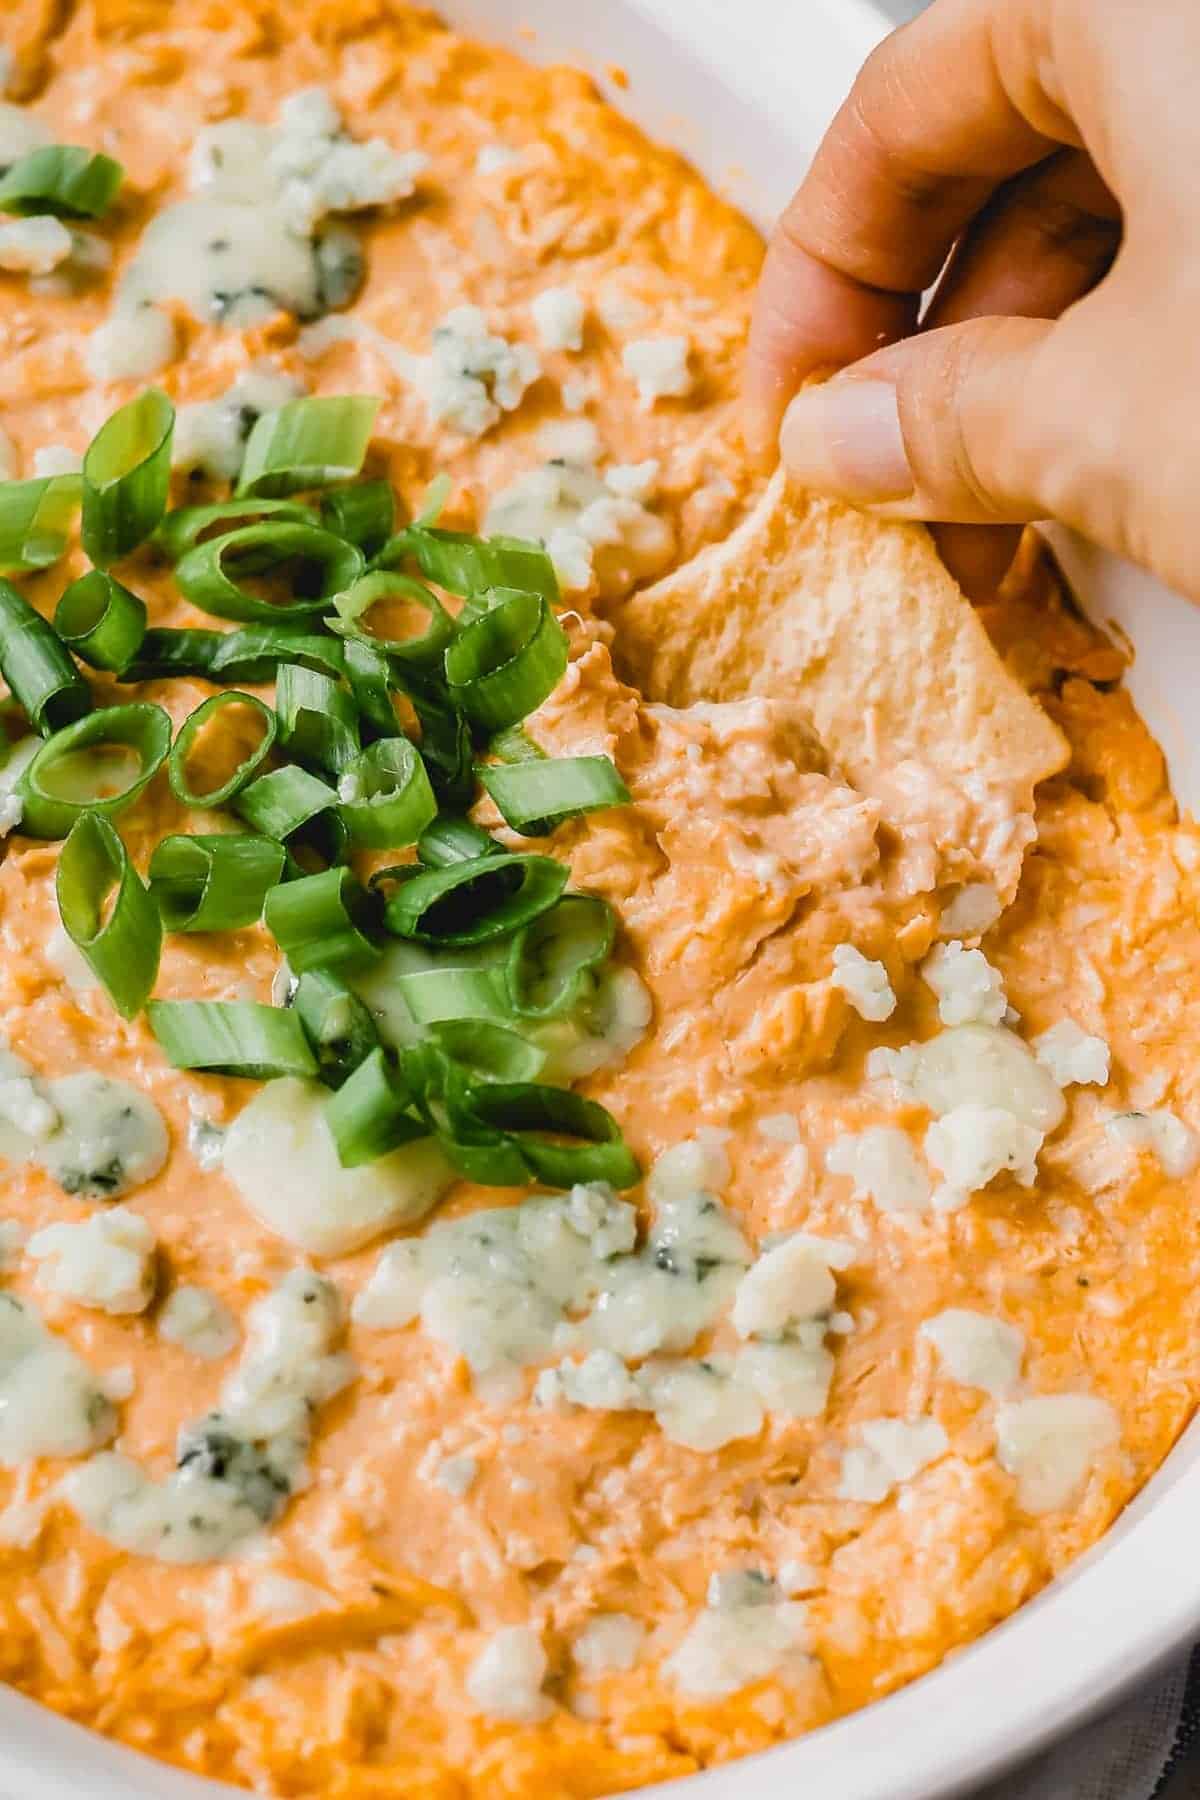 A chip scooping up some buffalo chicken dip with blue cheese